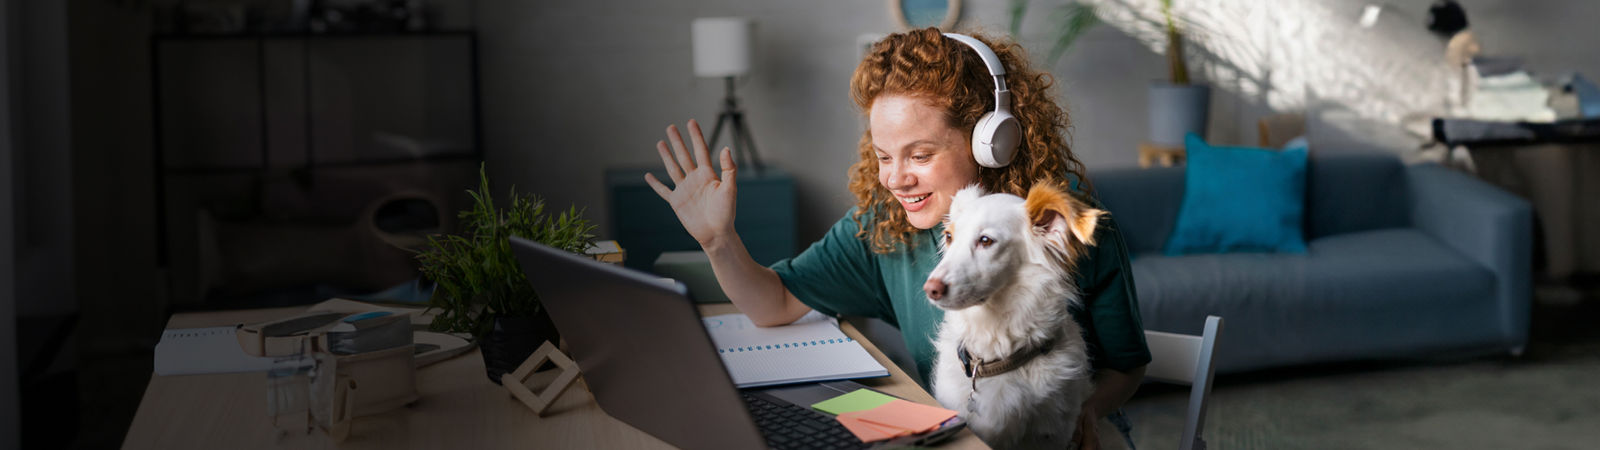 Woman with dog and headphones on video-call